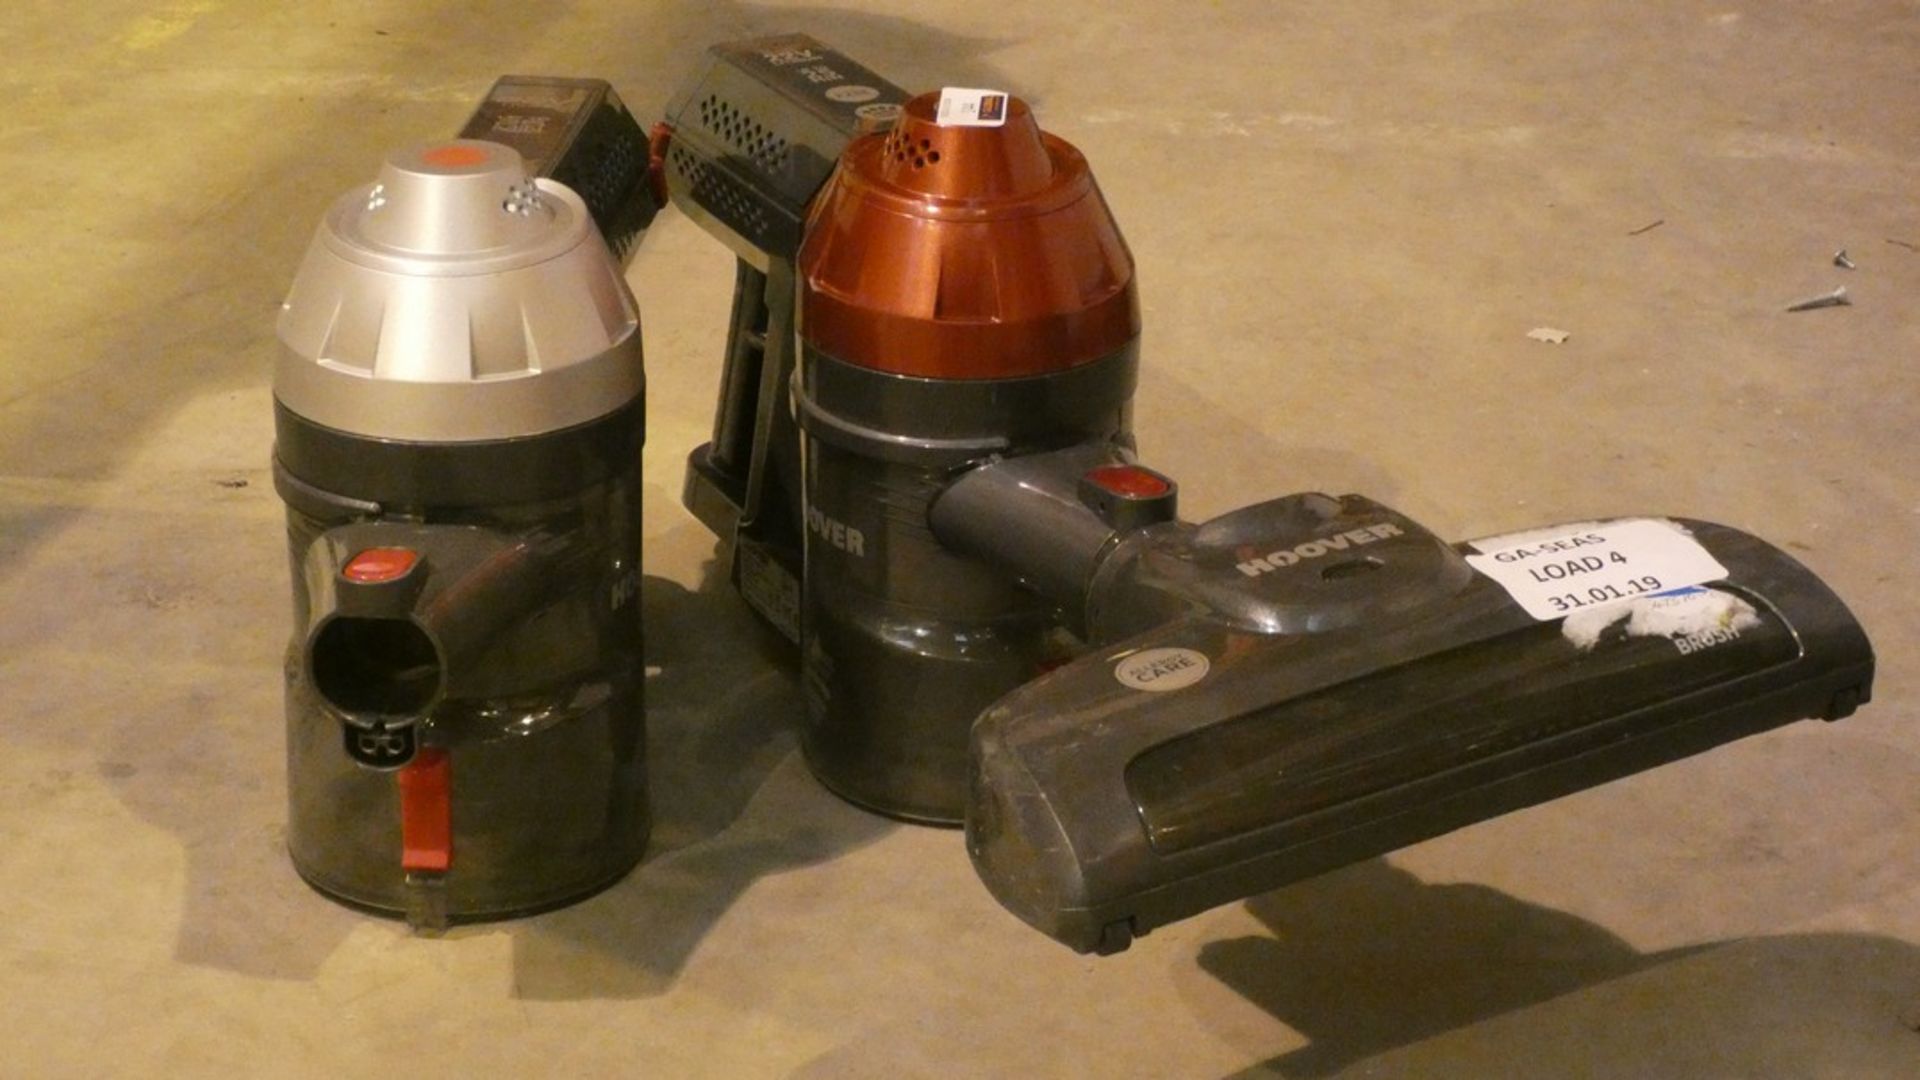 Lot to Contain 2 Assorted Hoover Handheld Vacuum Cleaners (Customer Return)